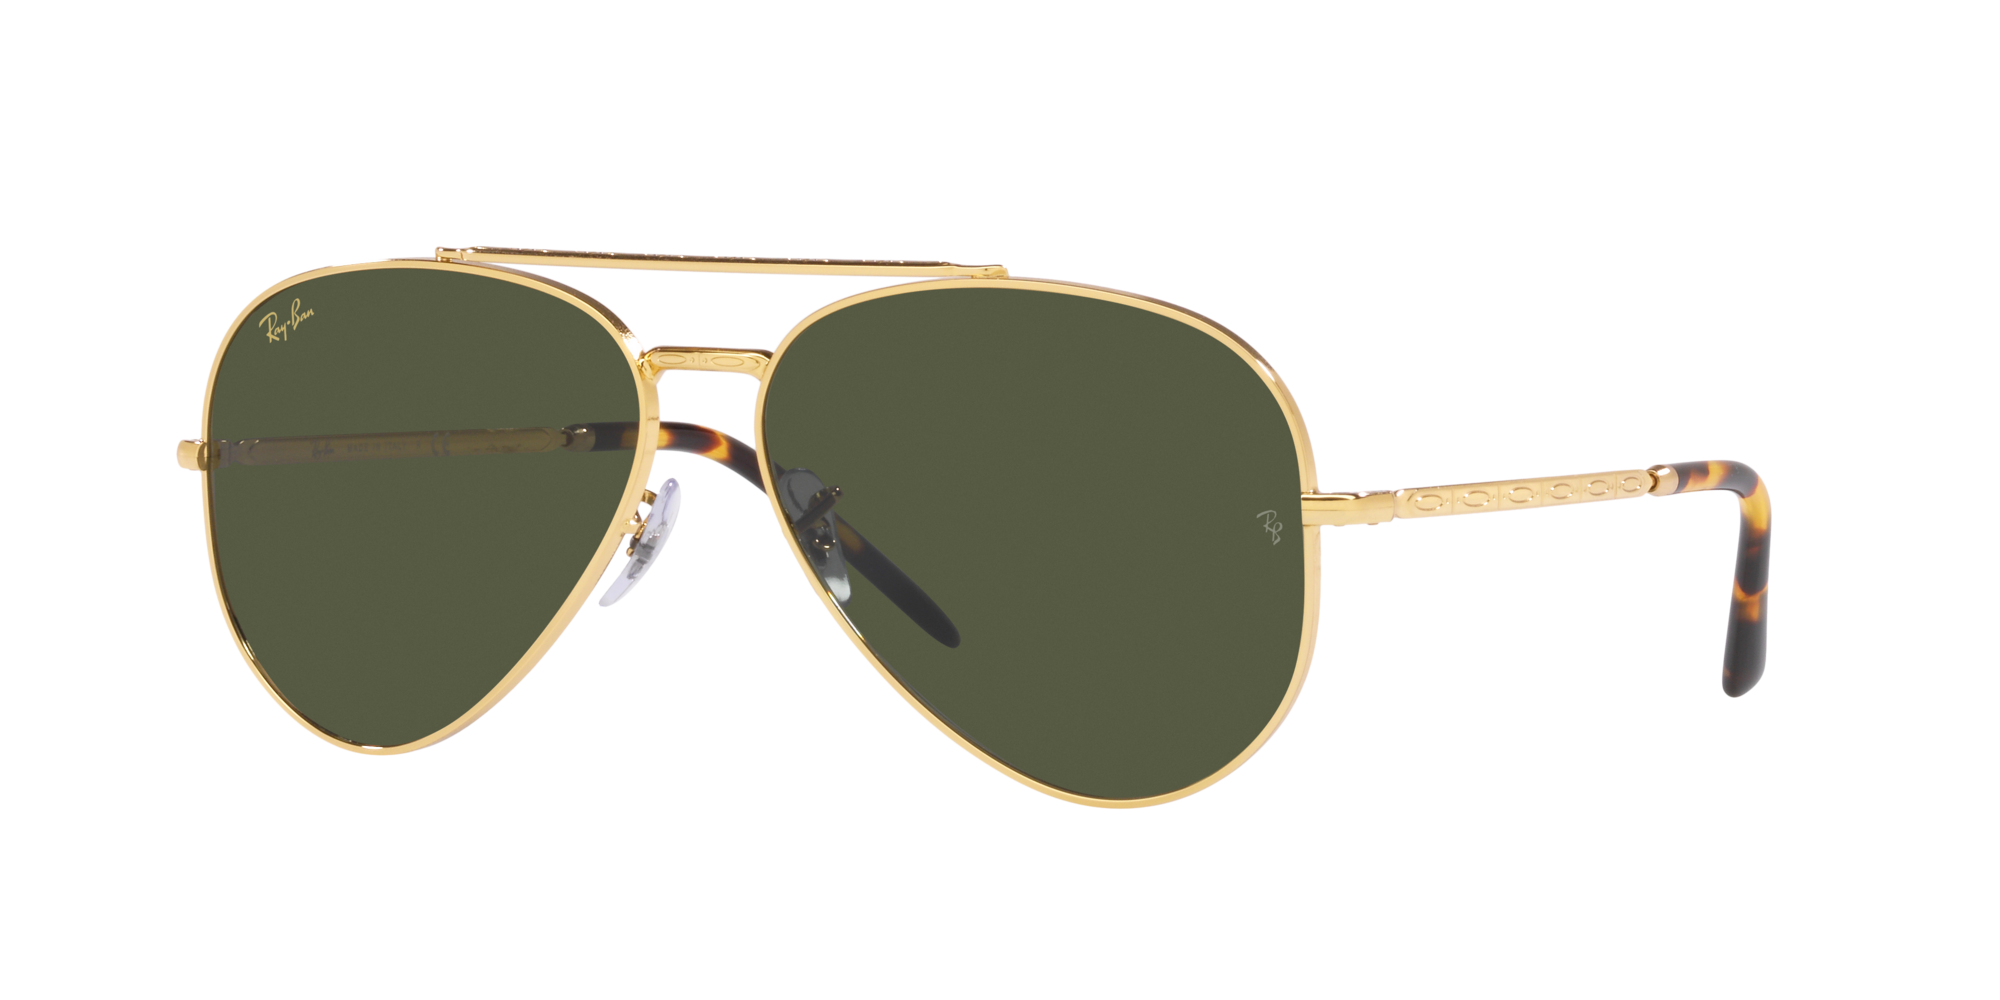 New Aviator Ray-Ban Unisex Sonnenbrille in Gold RB3625 919631 58